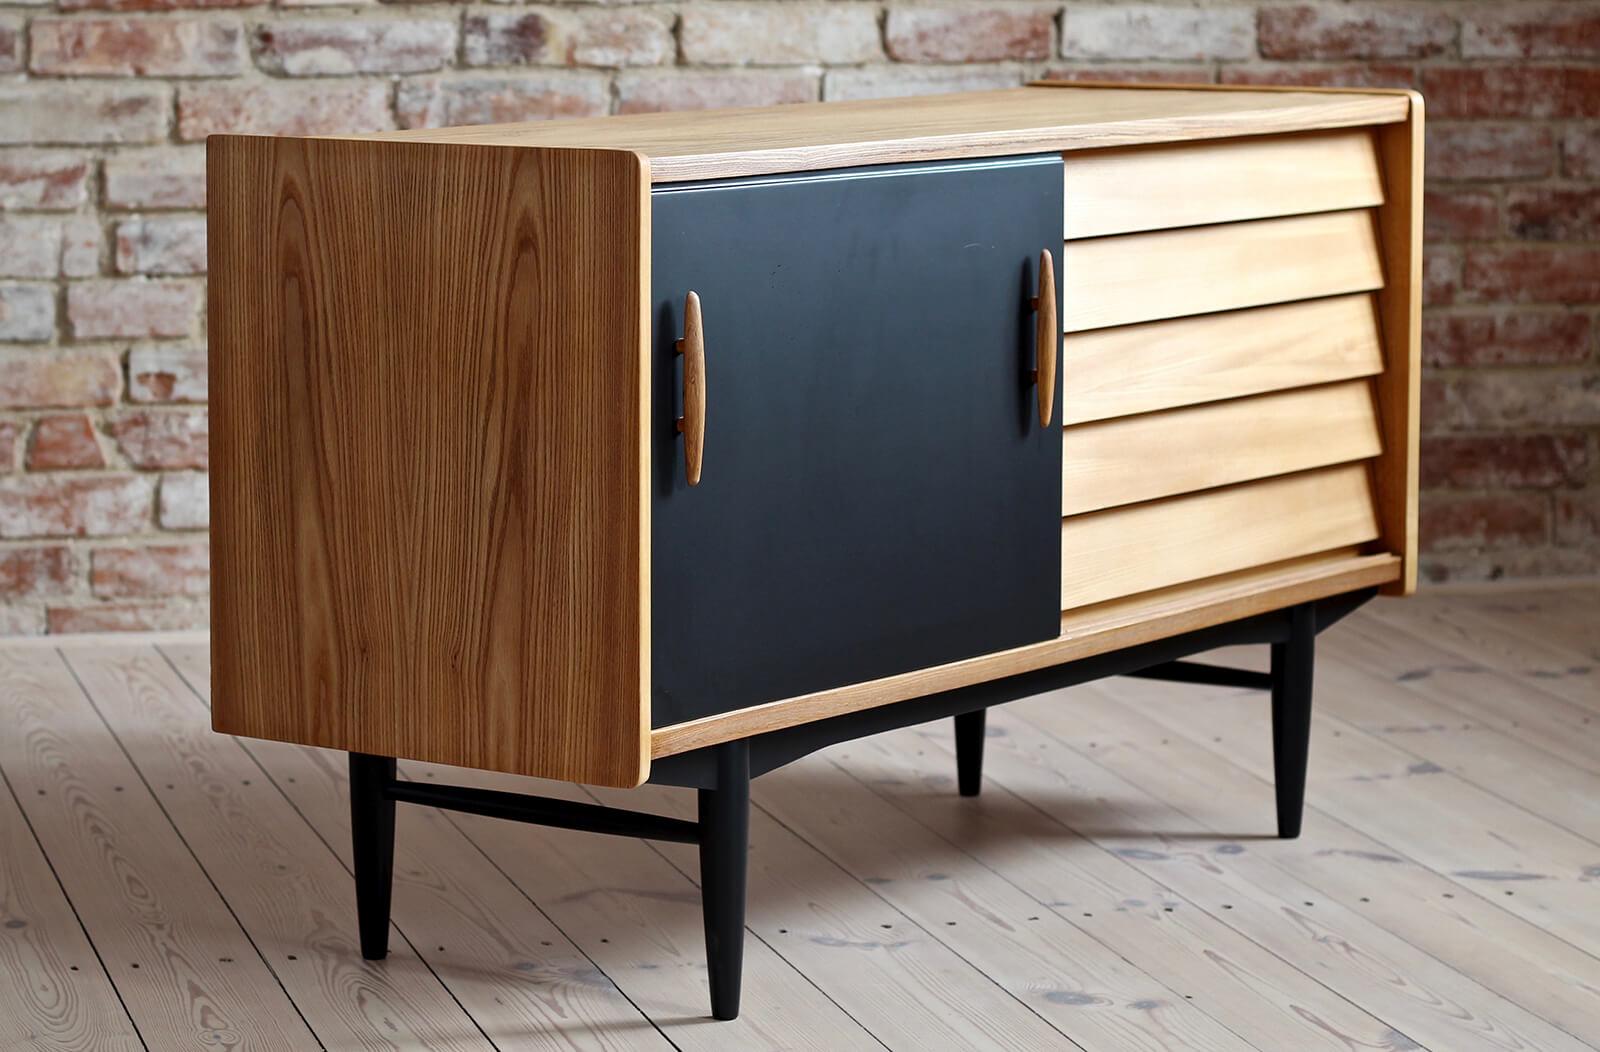 This is a not so common model of sideboard by Nils Jonsson in ashwood with black sliding door, two sculpted handles, elegant black base completed with subtle sculpted legs - a great example of Scandinavian Modern style in its best. The piece was